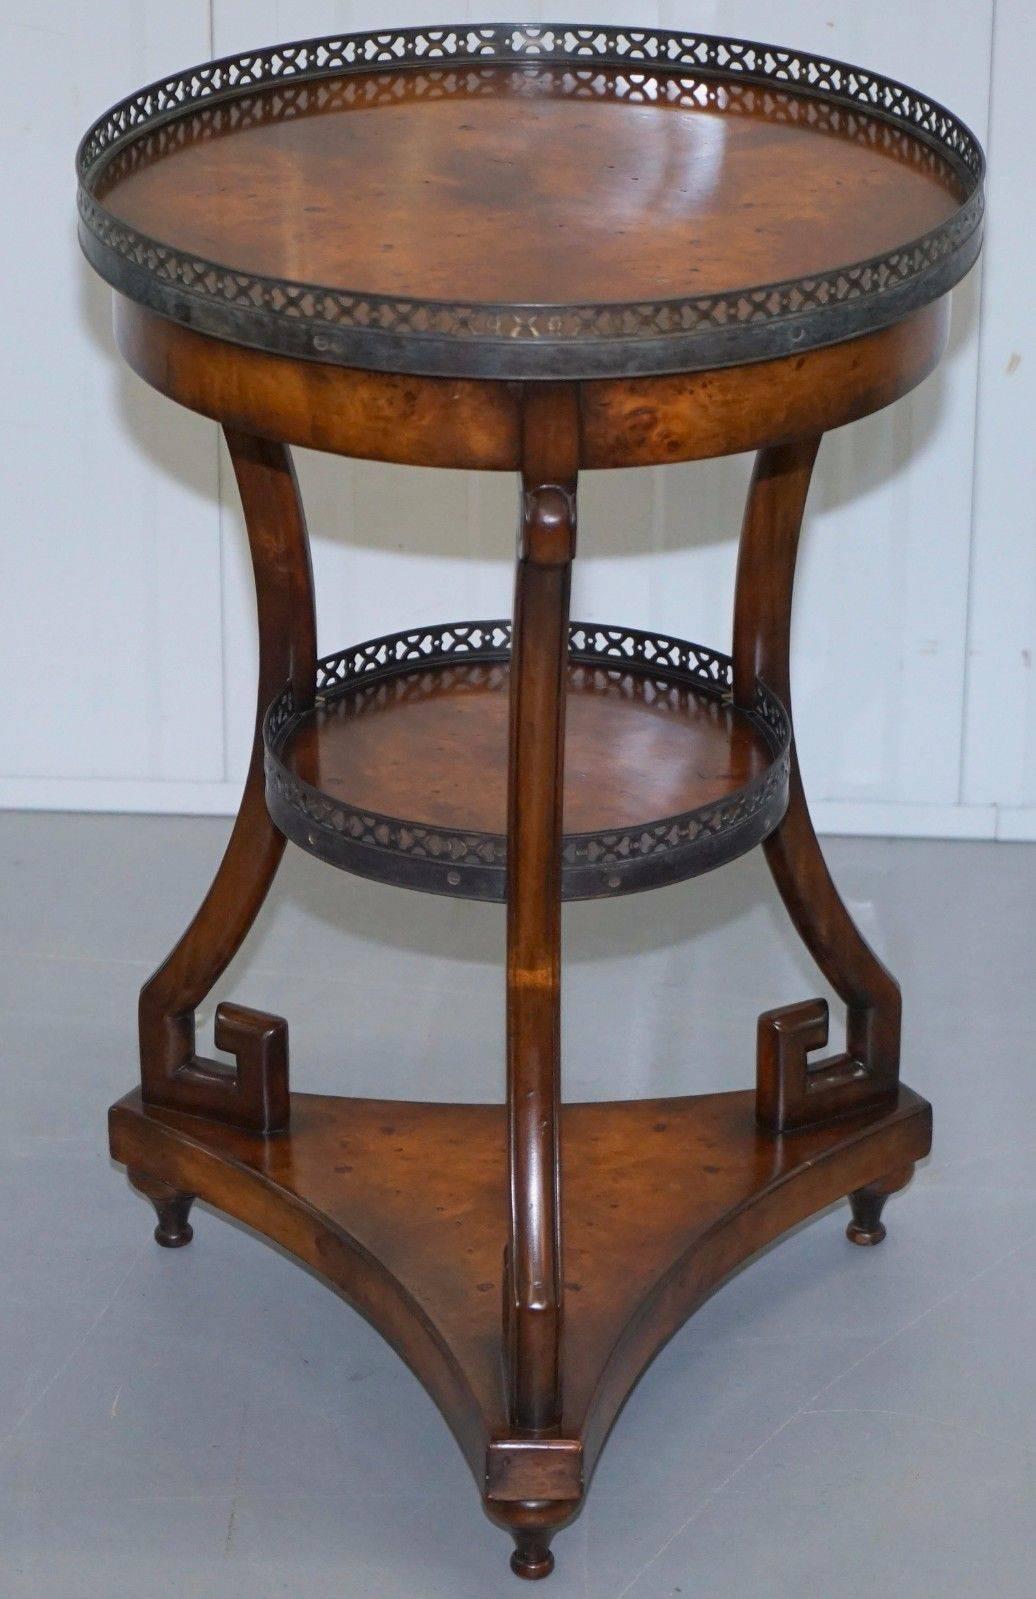 We are delighted to offer for sale this lovely pair of Theodore Alexander original Louis XVI burr walnut side end lamp wine tables

Theodore Alexander is shaped by English Heritage handcrafts furniture and accessories for your home with